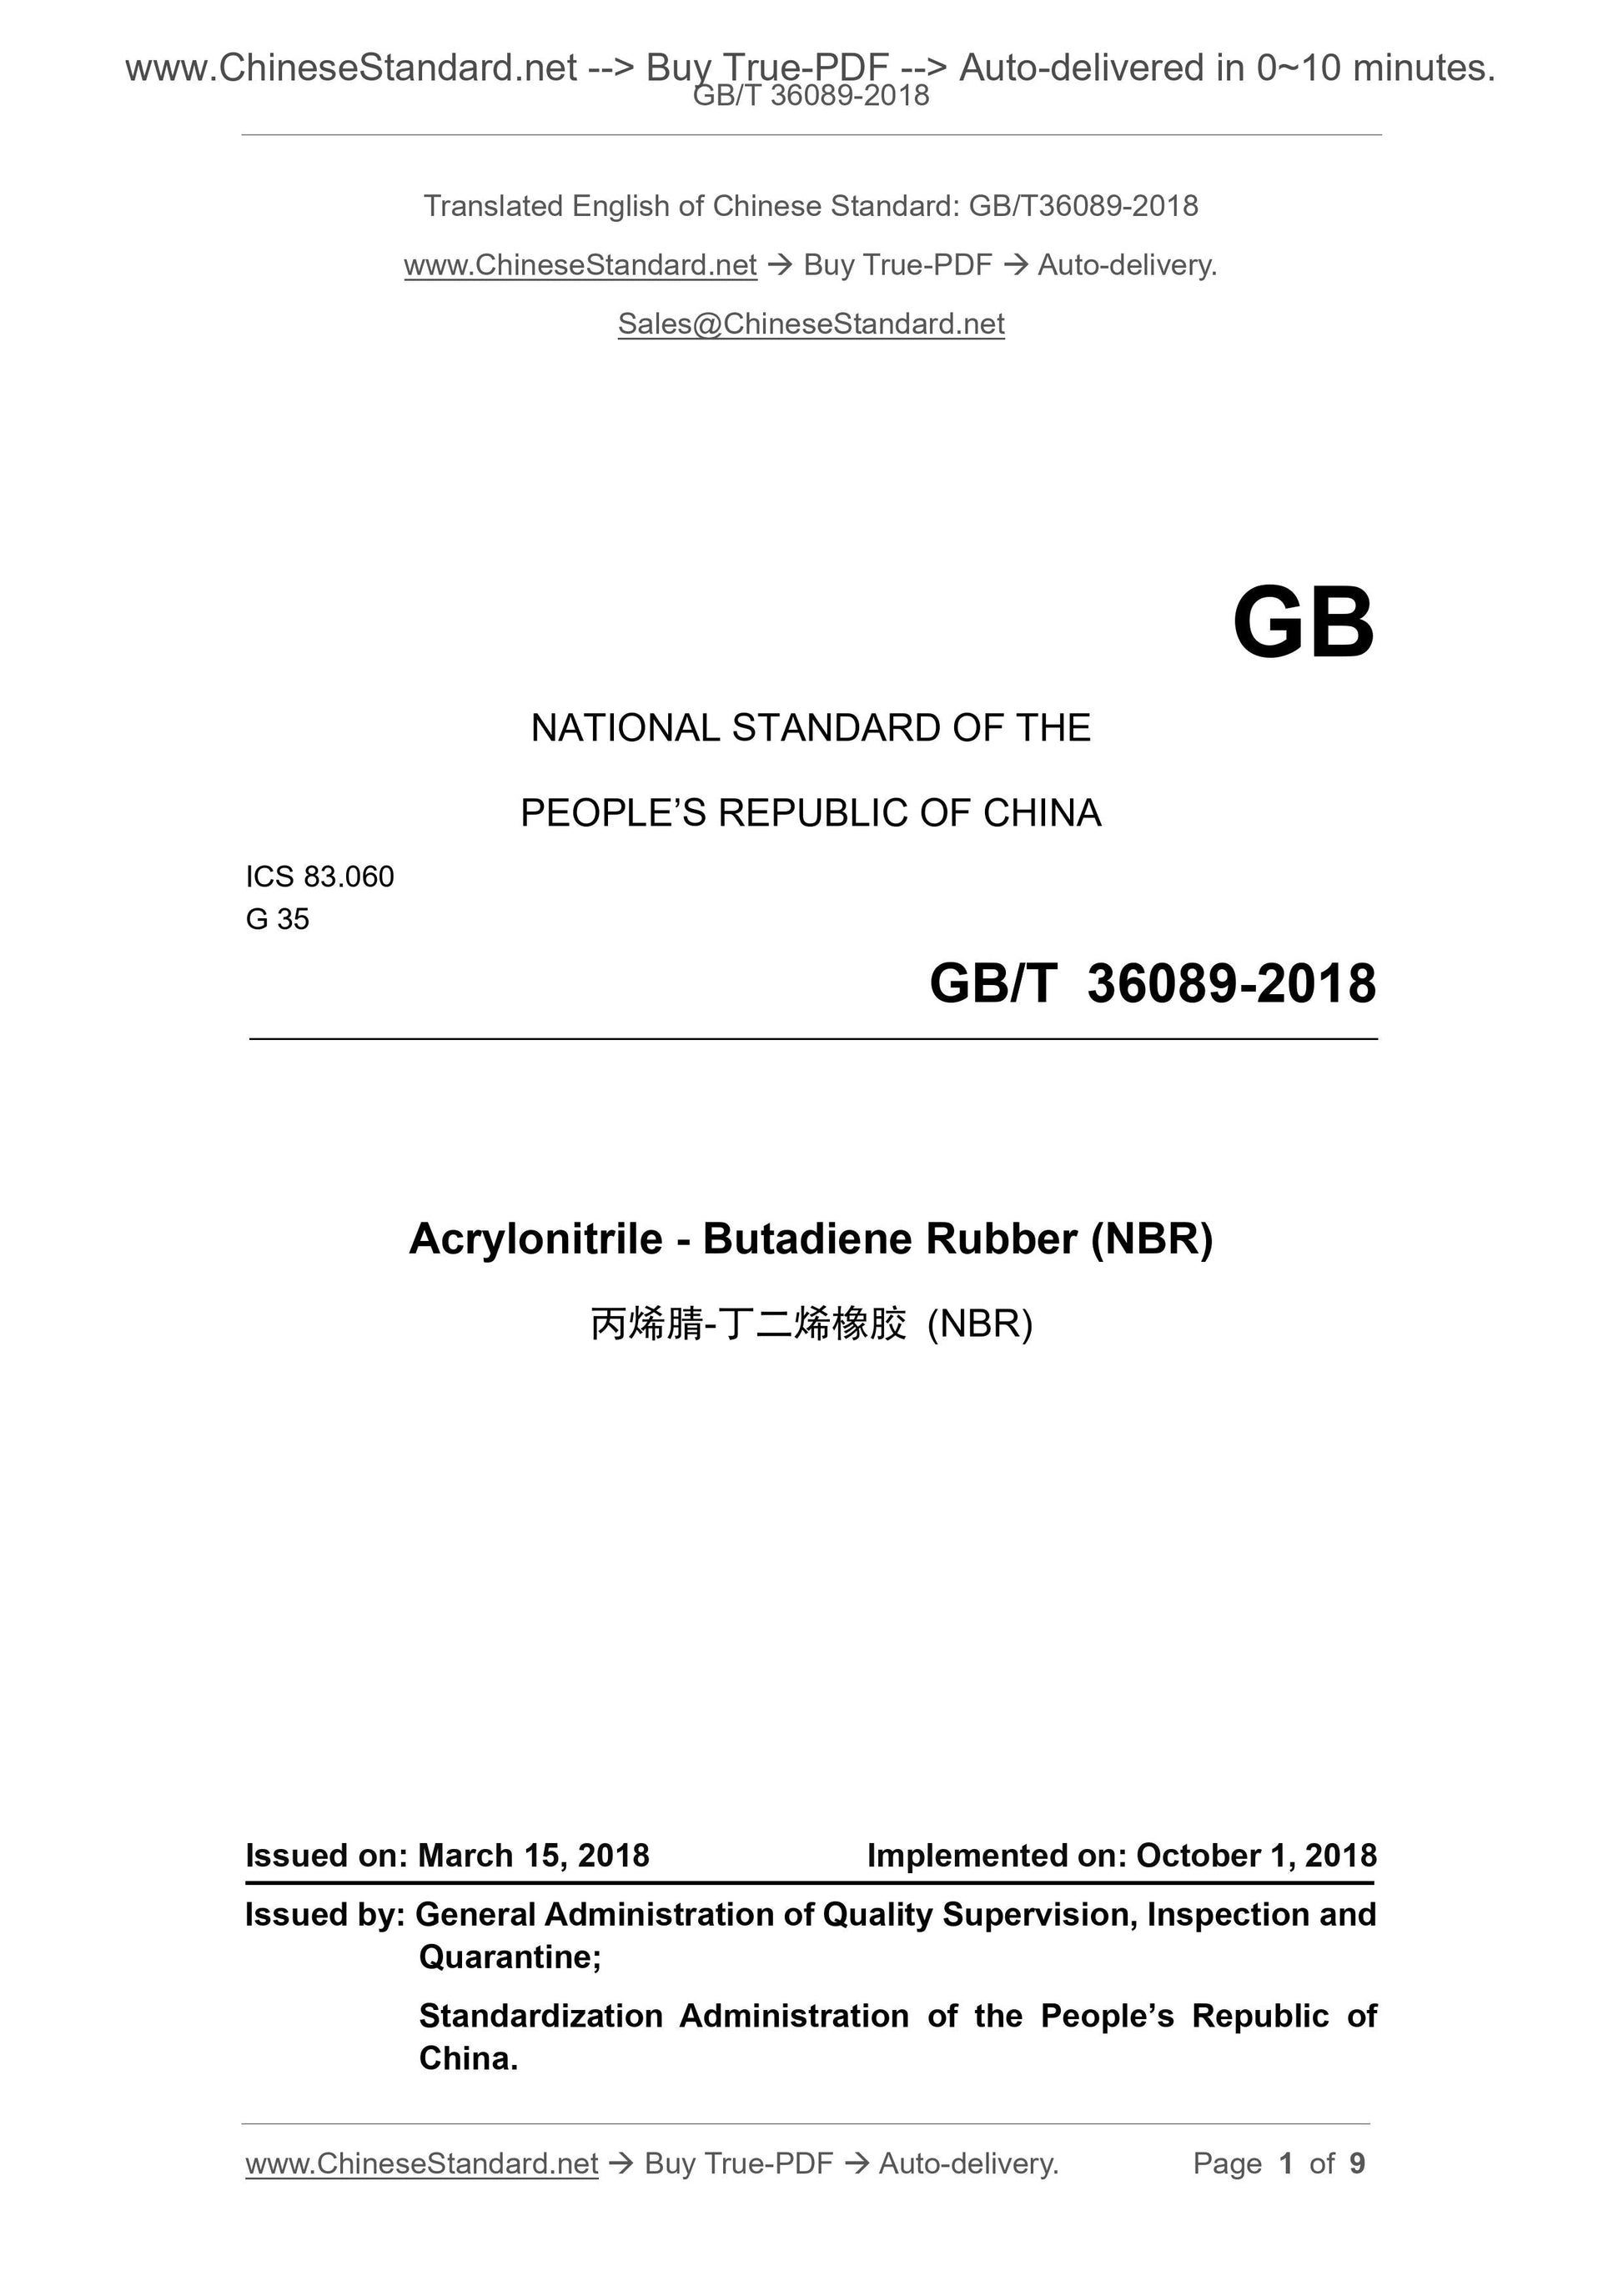 GB/T 36089-2018 Page 1